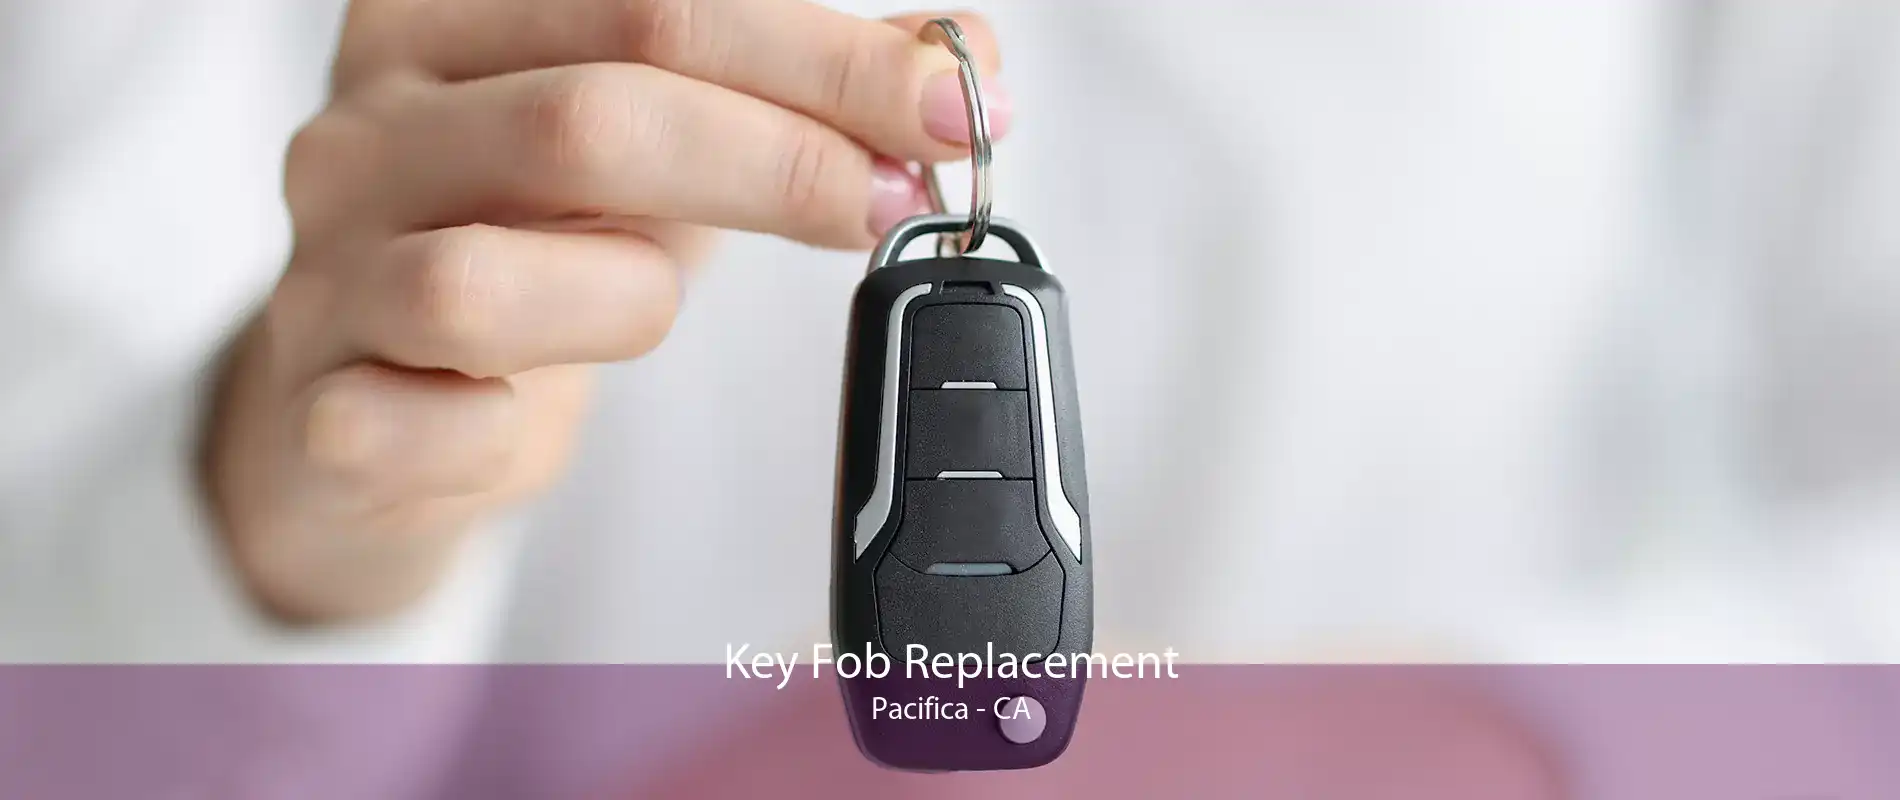 Key Fob Replacement Pacifica - CA